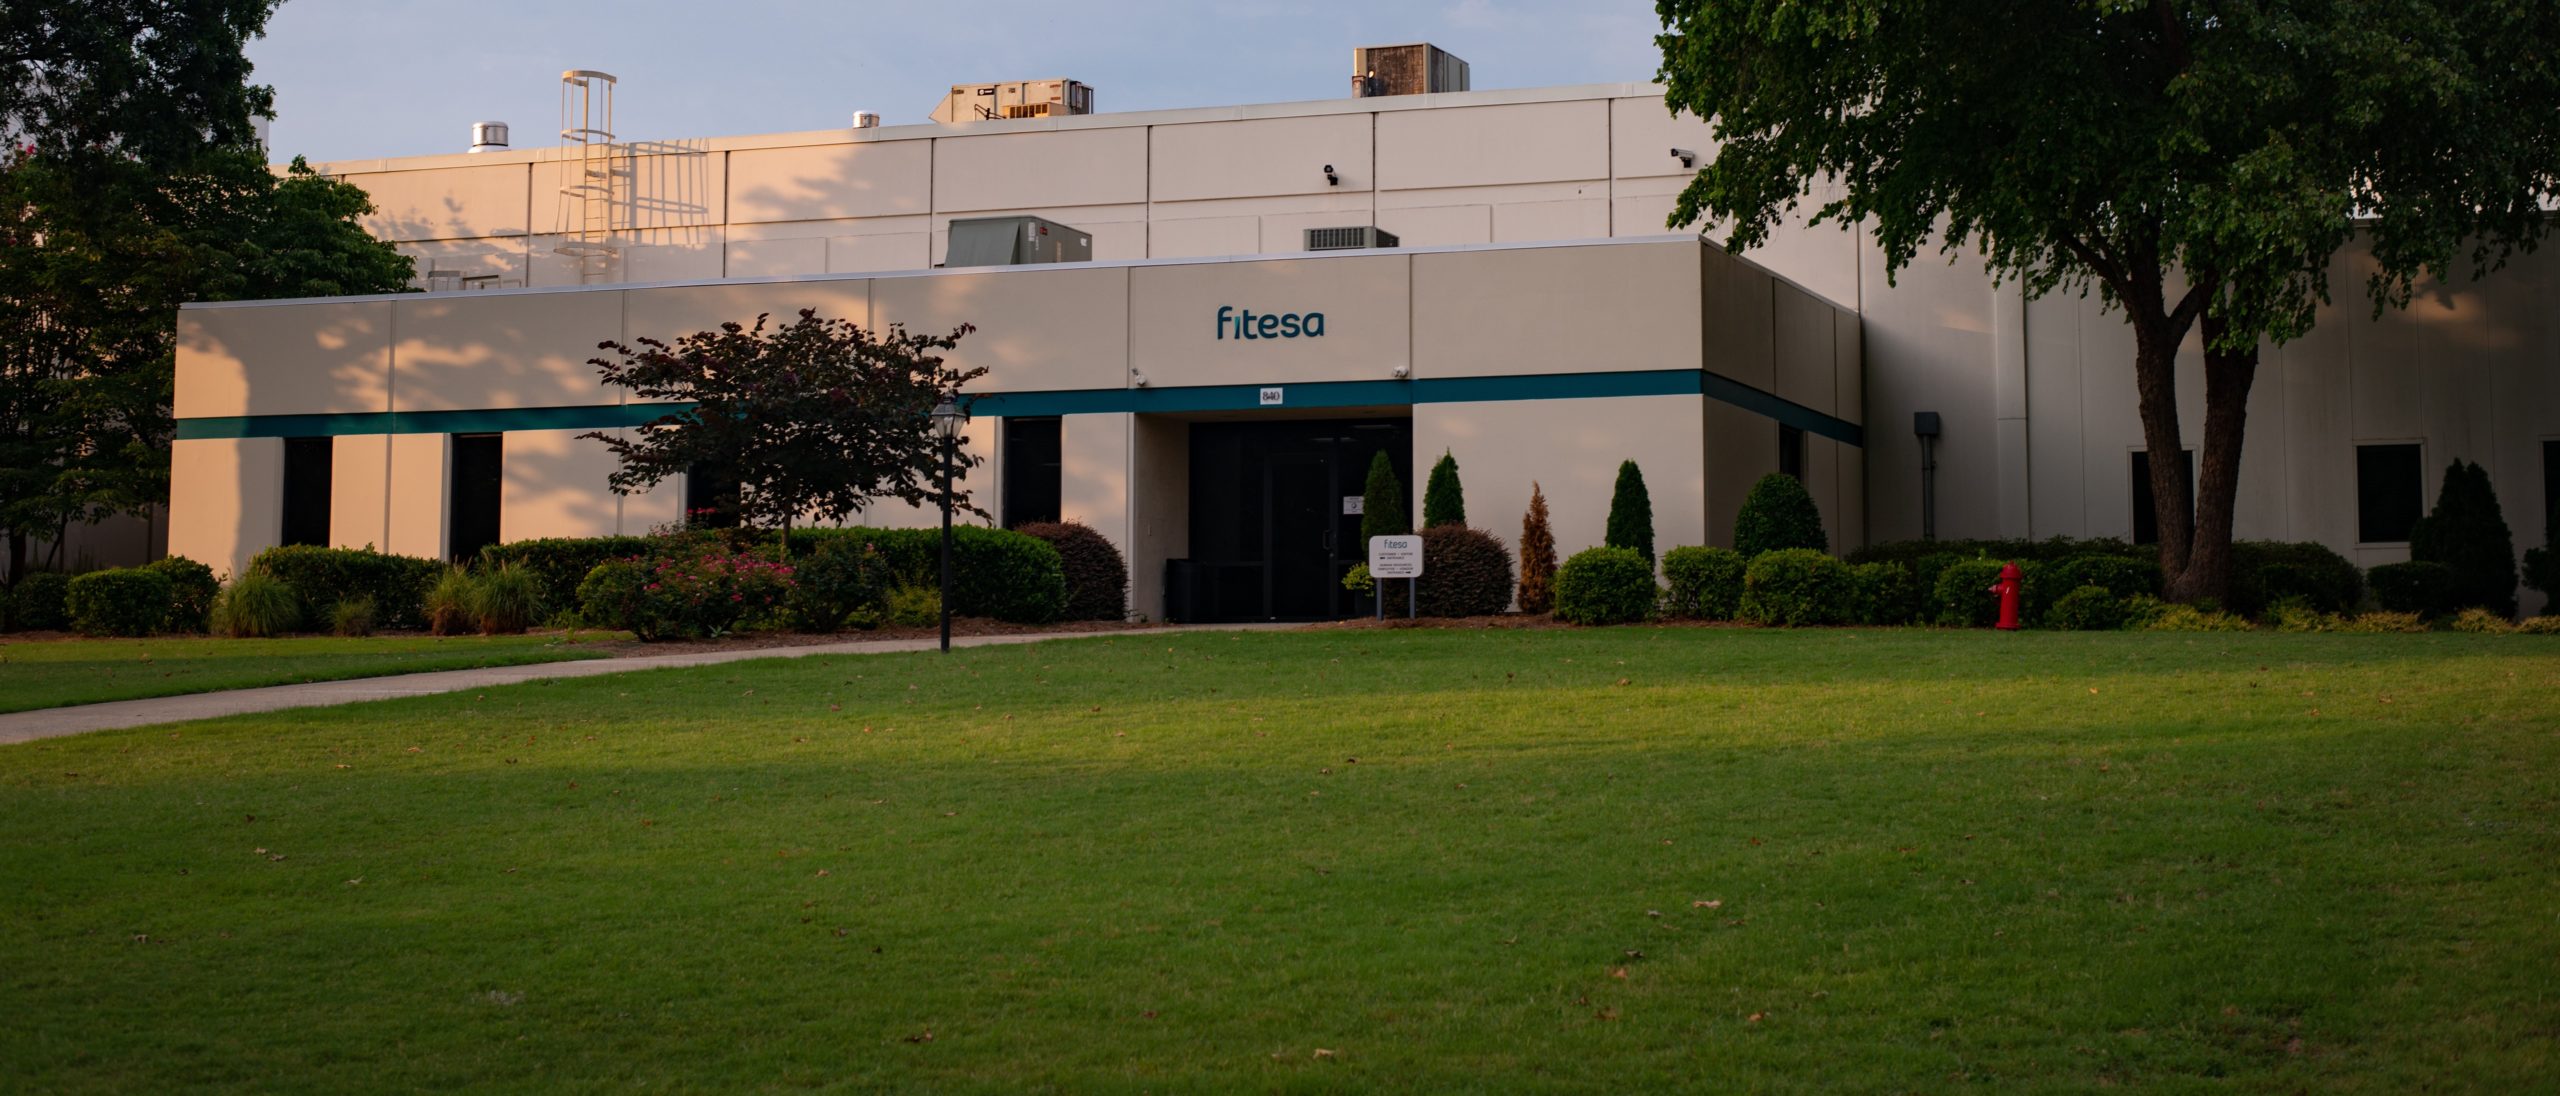 Fitesa Invests in the Future of Nonwovens in the US